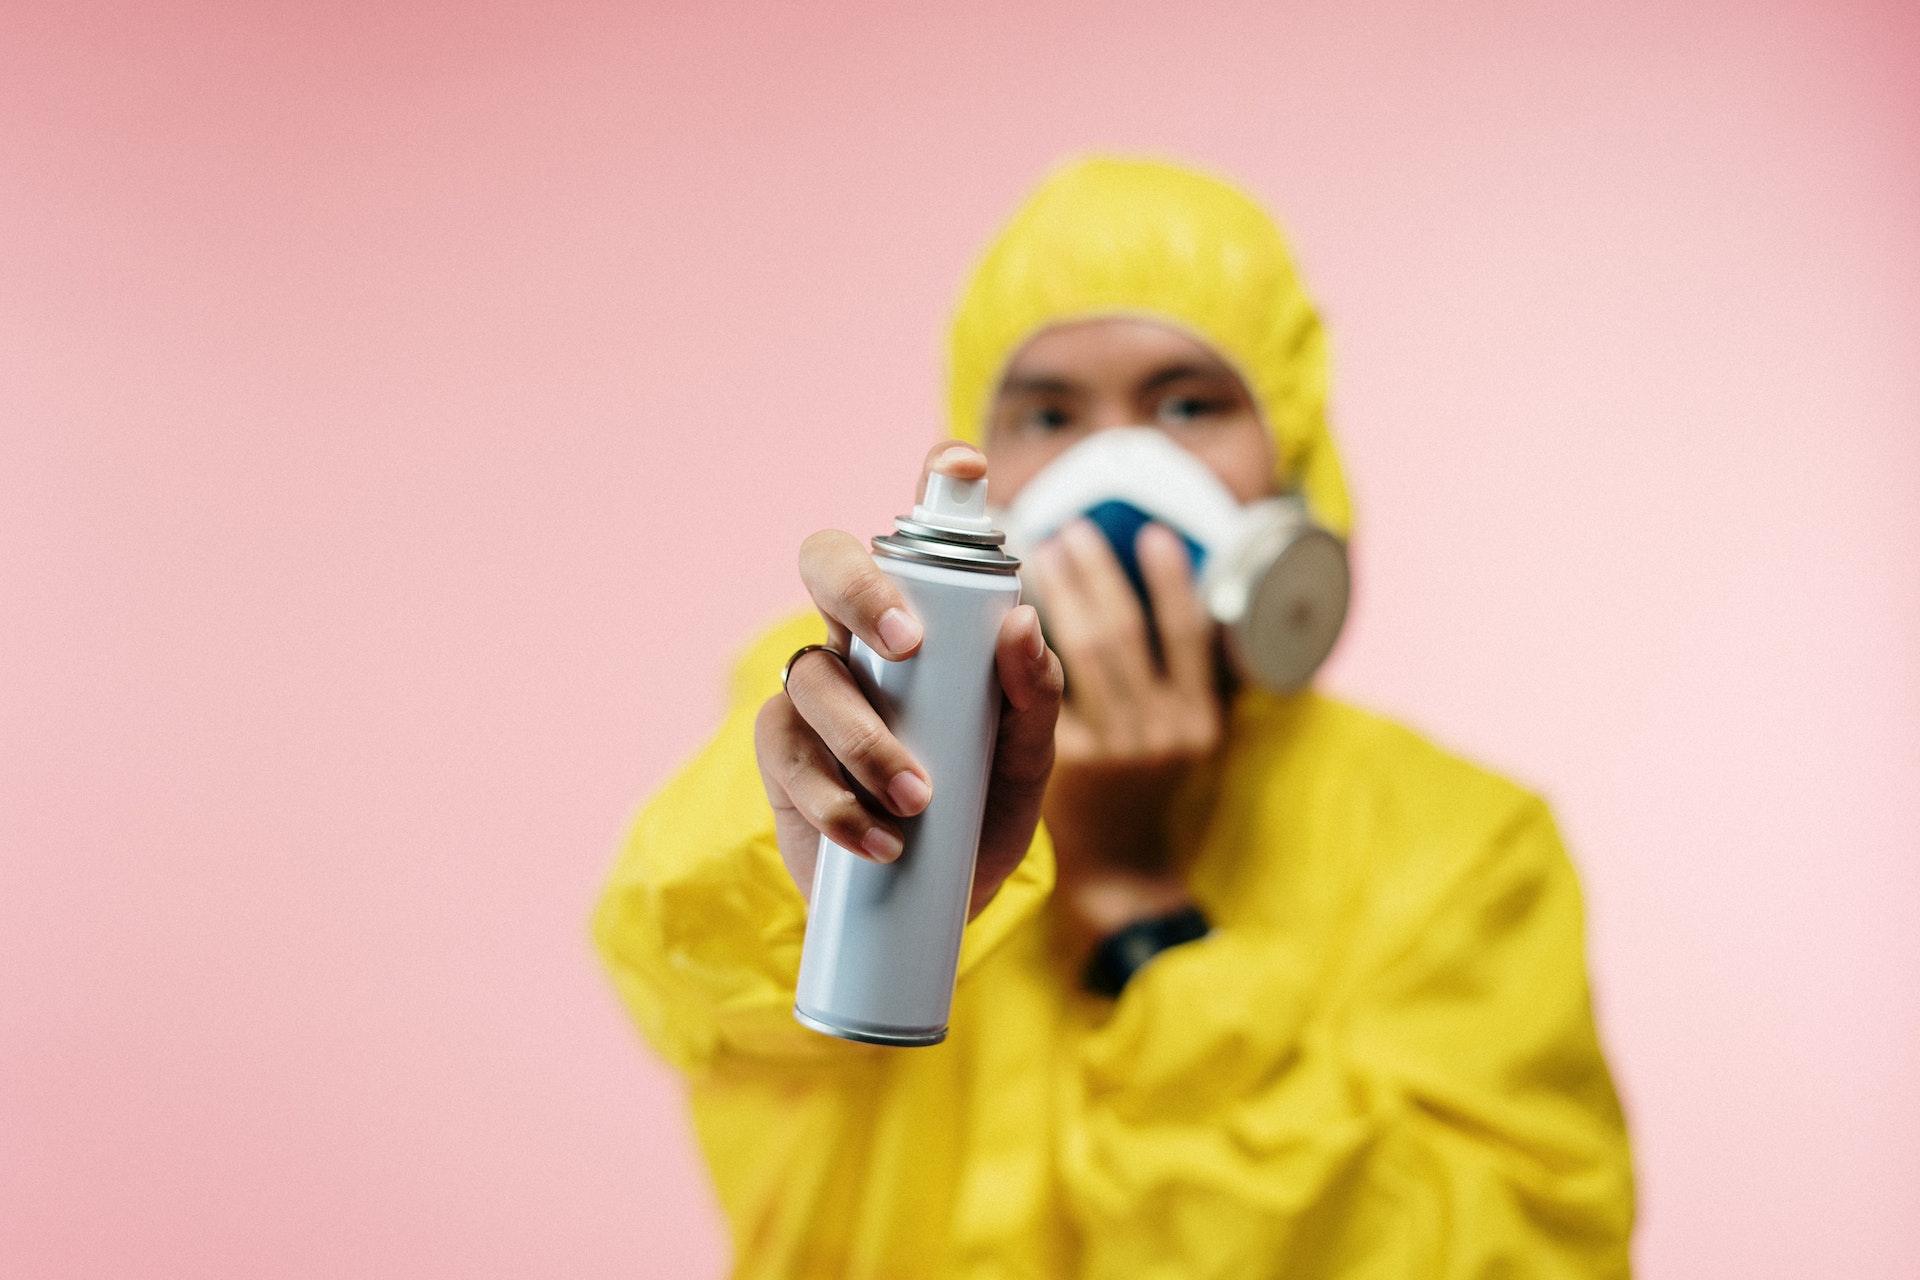 A person in a yellow hazmat suit against a peach colored wall. They are holding a respirator mask up to their face, and holding a can of aerosol spray toward the camera.